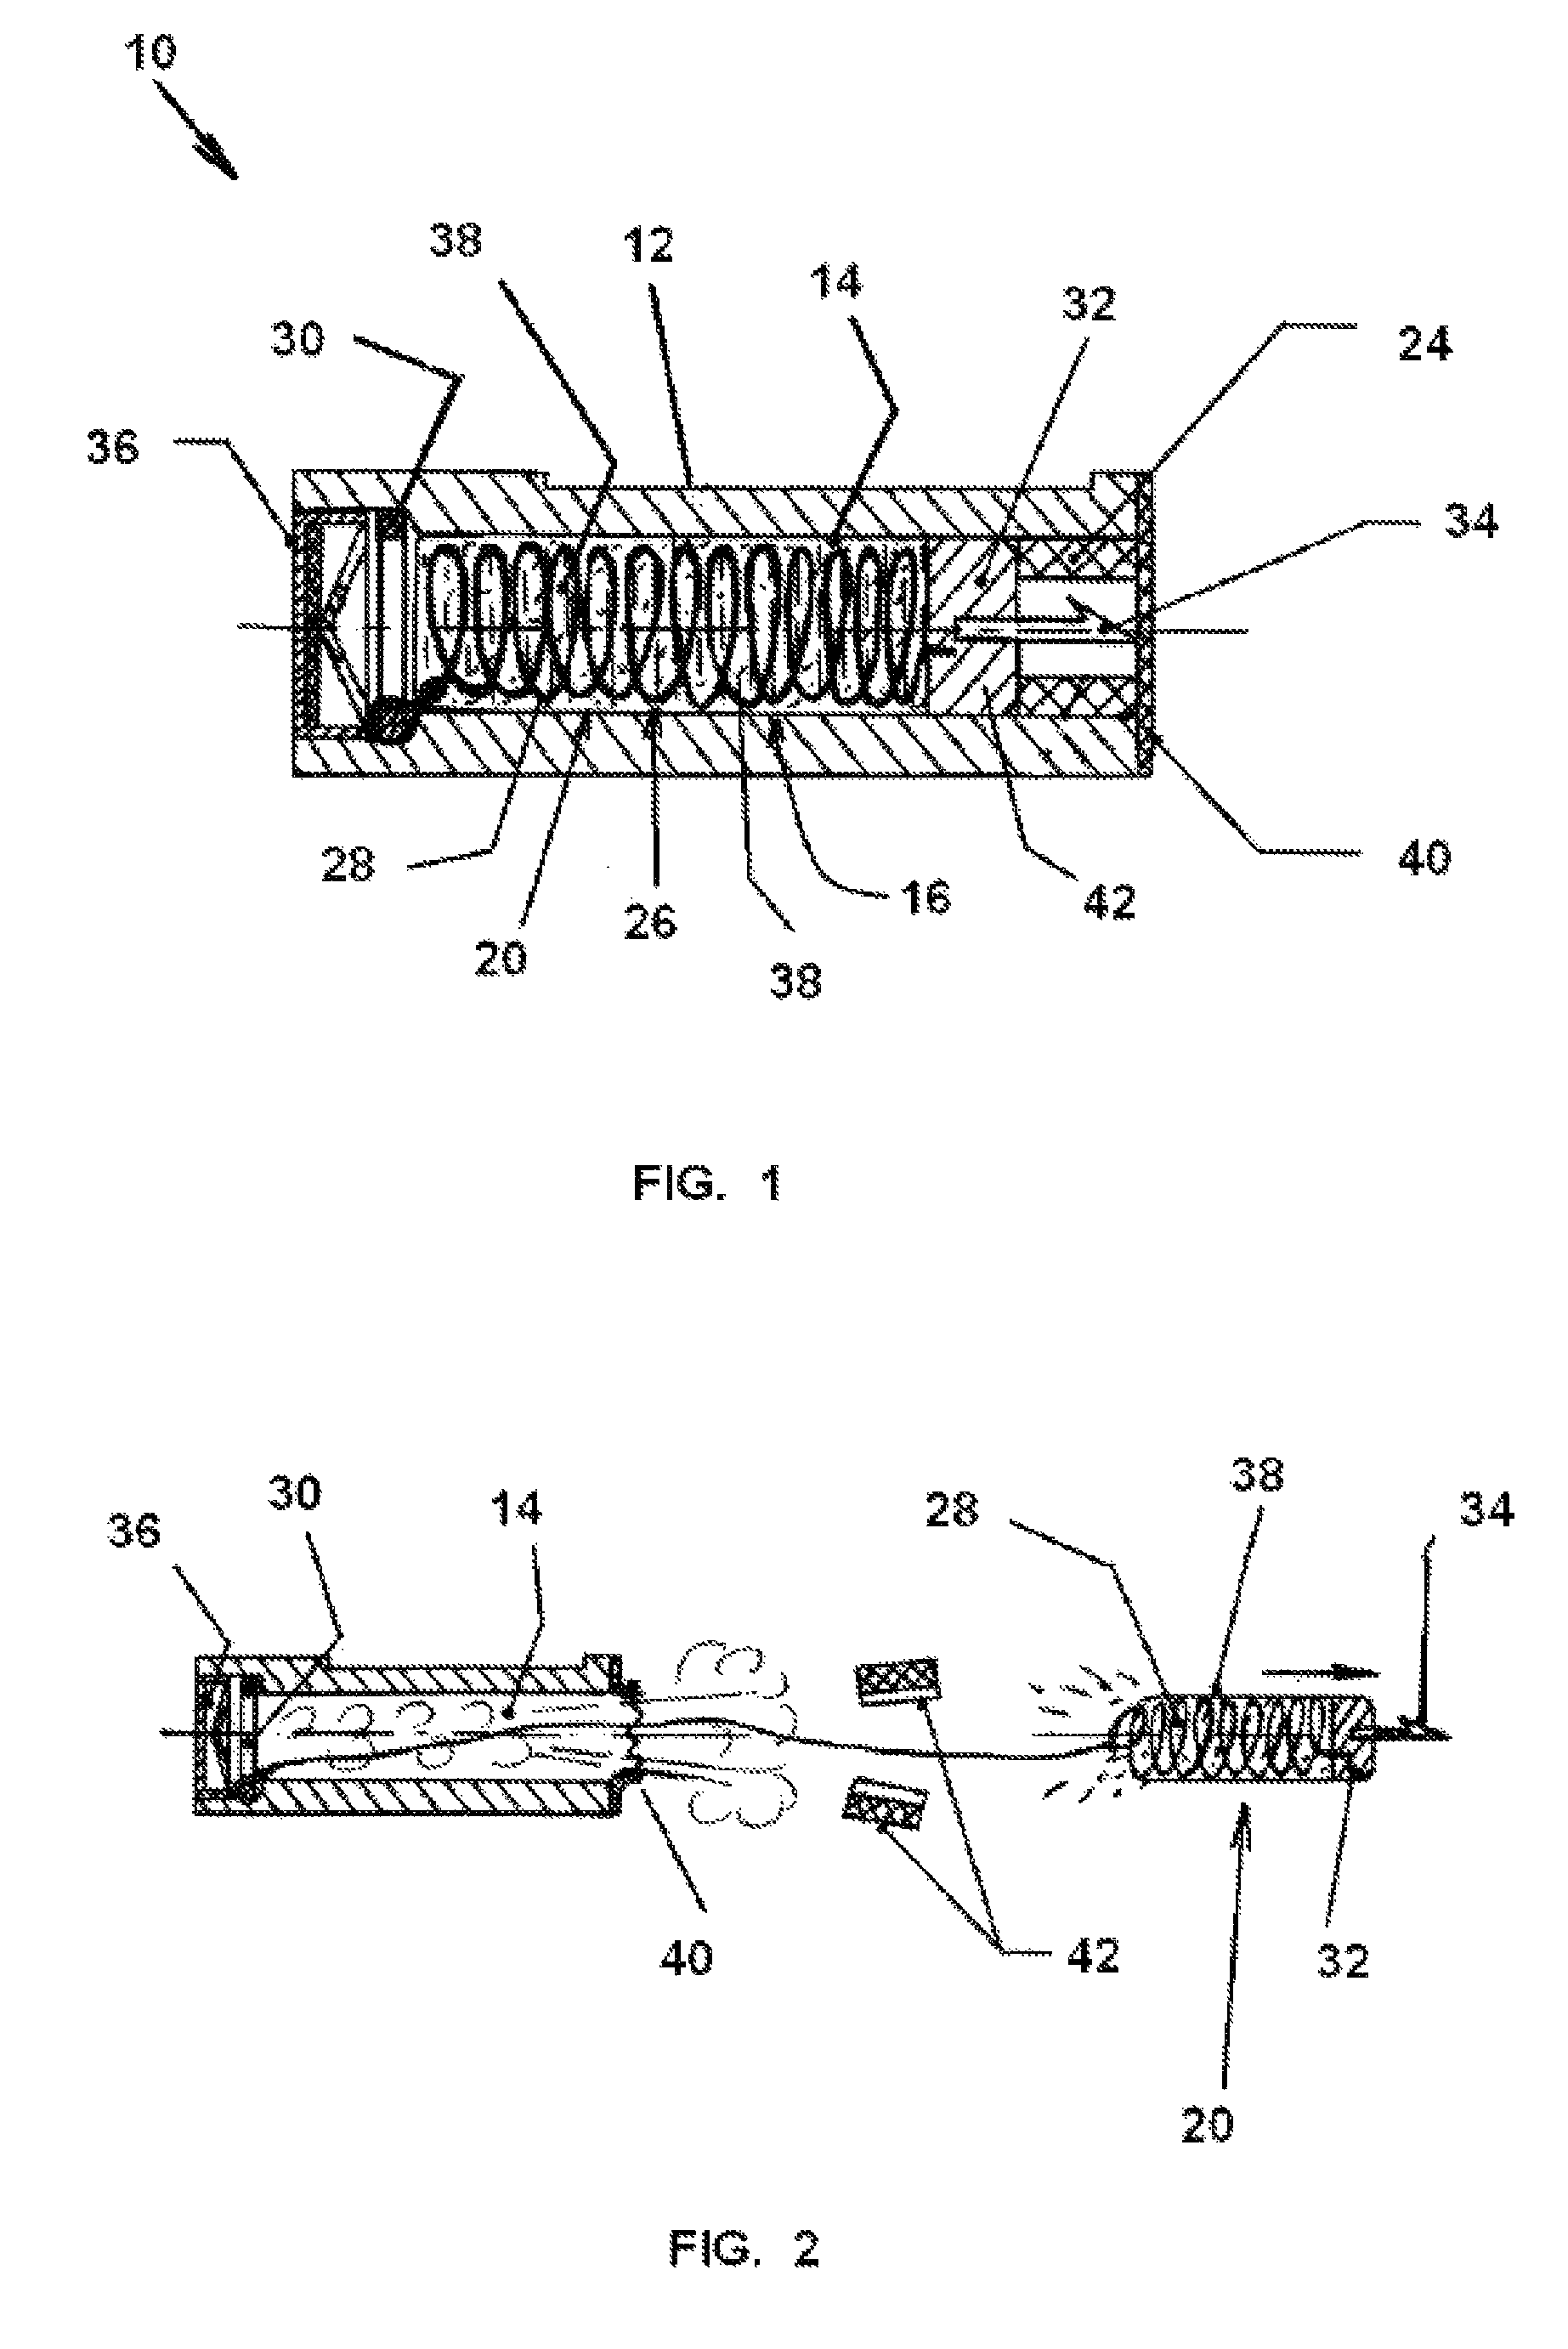 Cartridge for remote electroshock weapon